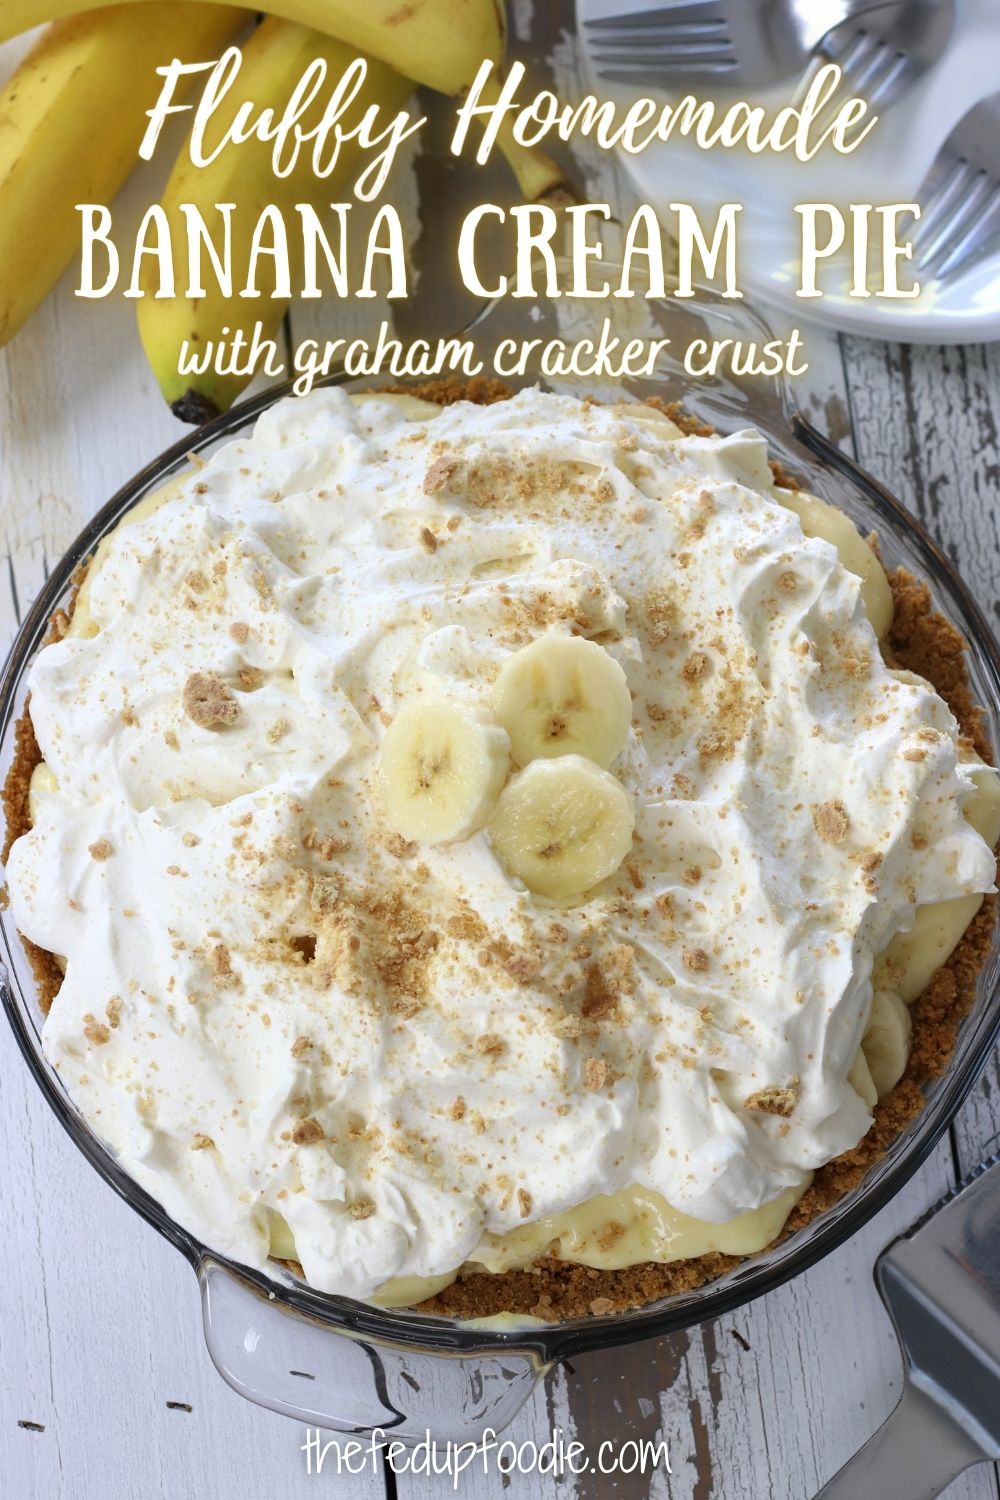 The perfect dessert for the holidays, this Banana Cream Pie has silky from-scratch pudding, a graham cracker crust and fluffy homemade whipped cream. This recipe version simplifies and streamlines the making of a gourmet tasting pie at home. #BananaCreamPie #BananaCreamPieRecipe #BananaCreamPieEasy #BananaCreamPieWithPudding #BananaCreamPieWithGrahamCrust #BananaPieRecipeEasy #BananaDessertRecipes